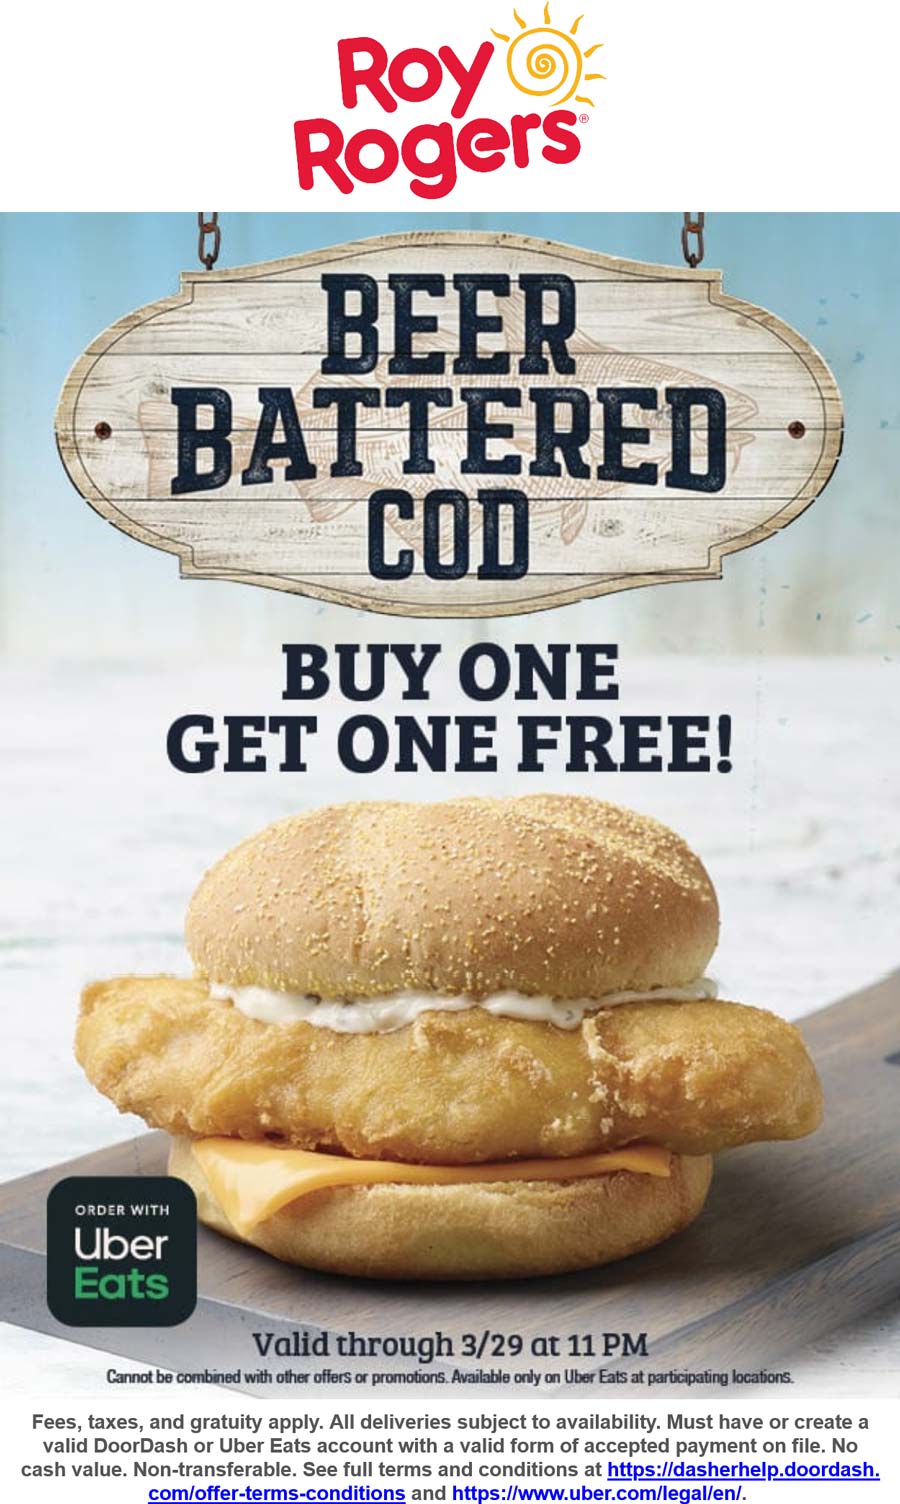 Roy Rogers restaurants Coupon  Second cod fish sandwich free via delivery at Roy Rogers #royrogers 